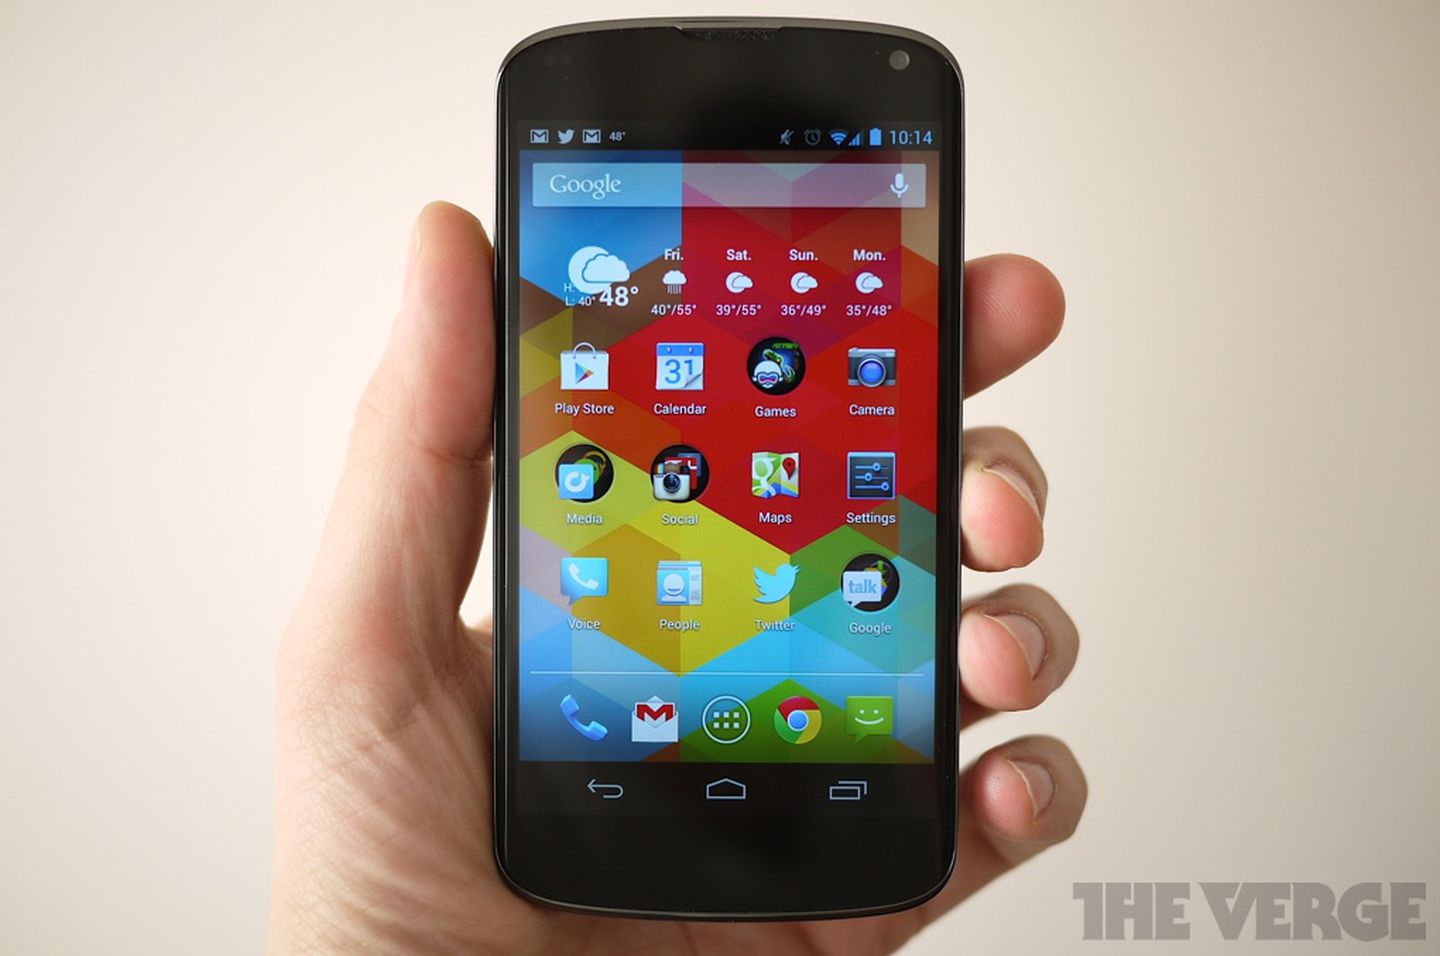 Hands-on with the Nexus 4 - The Verge